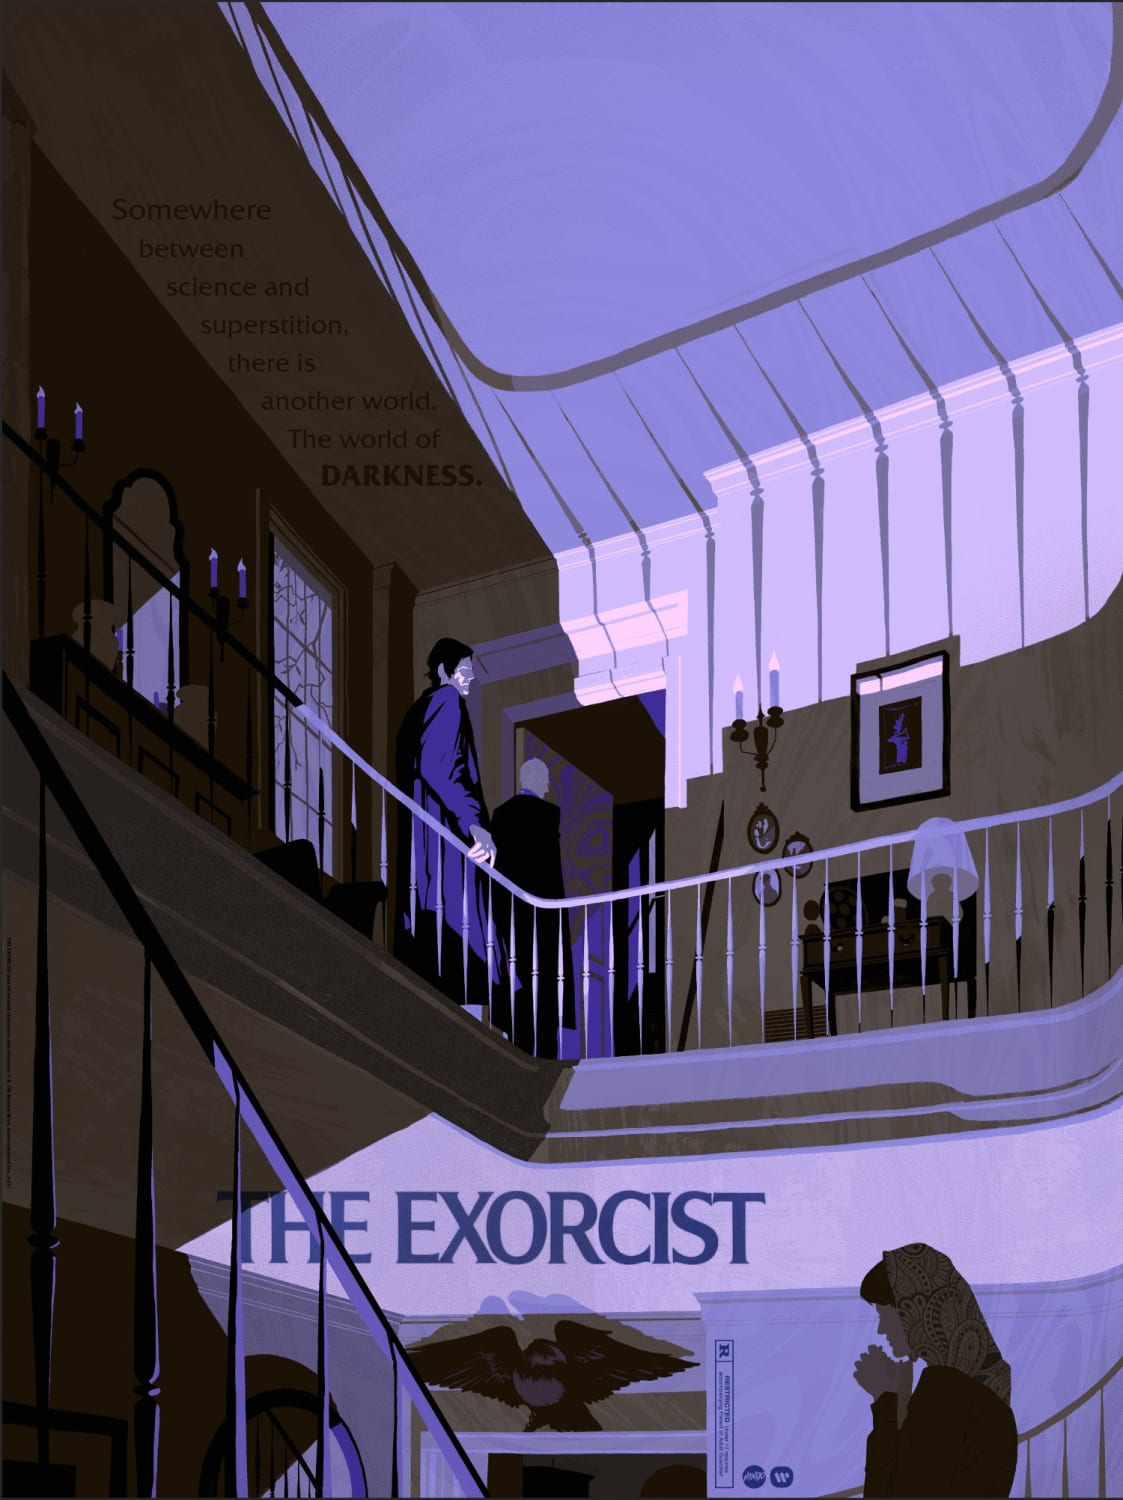 The Exorcist (1973) Mondo poster by K. Lam